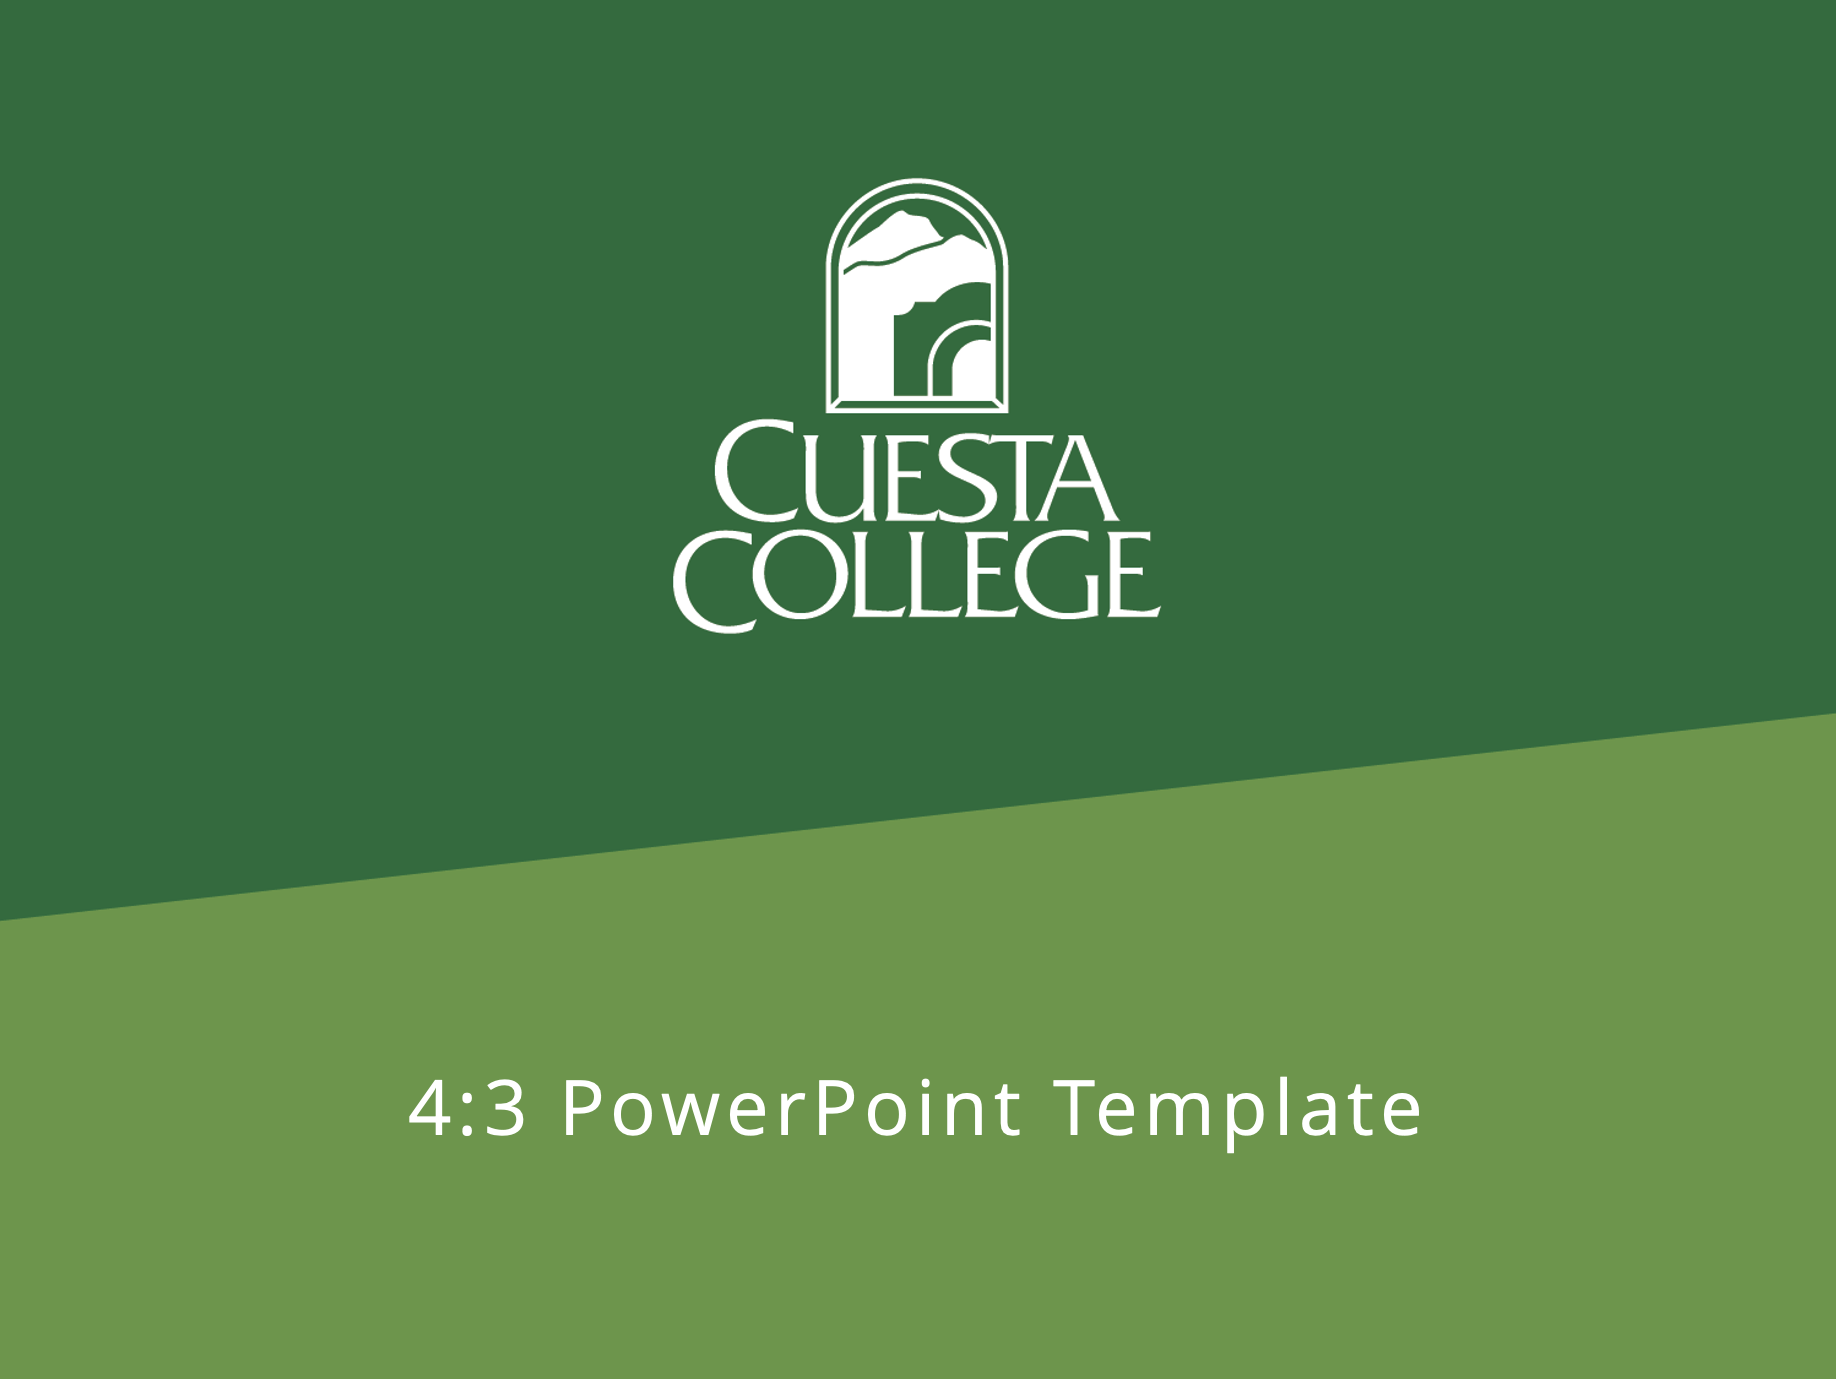 4:3 PowerPoint Template